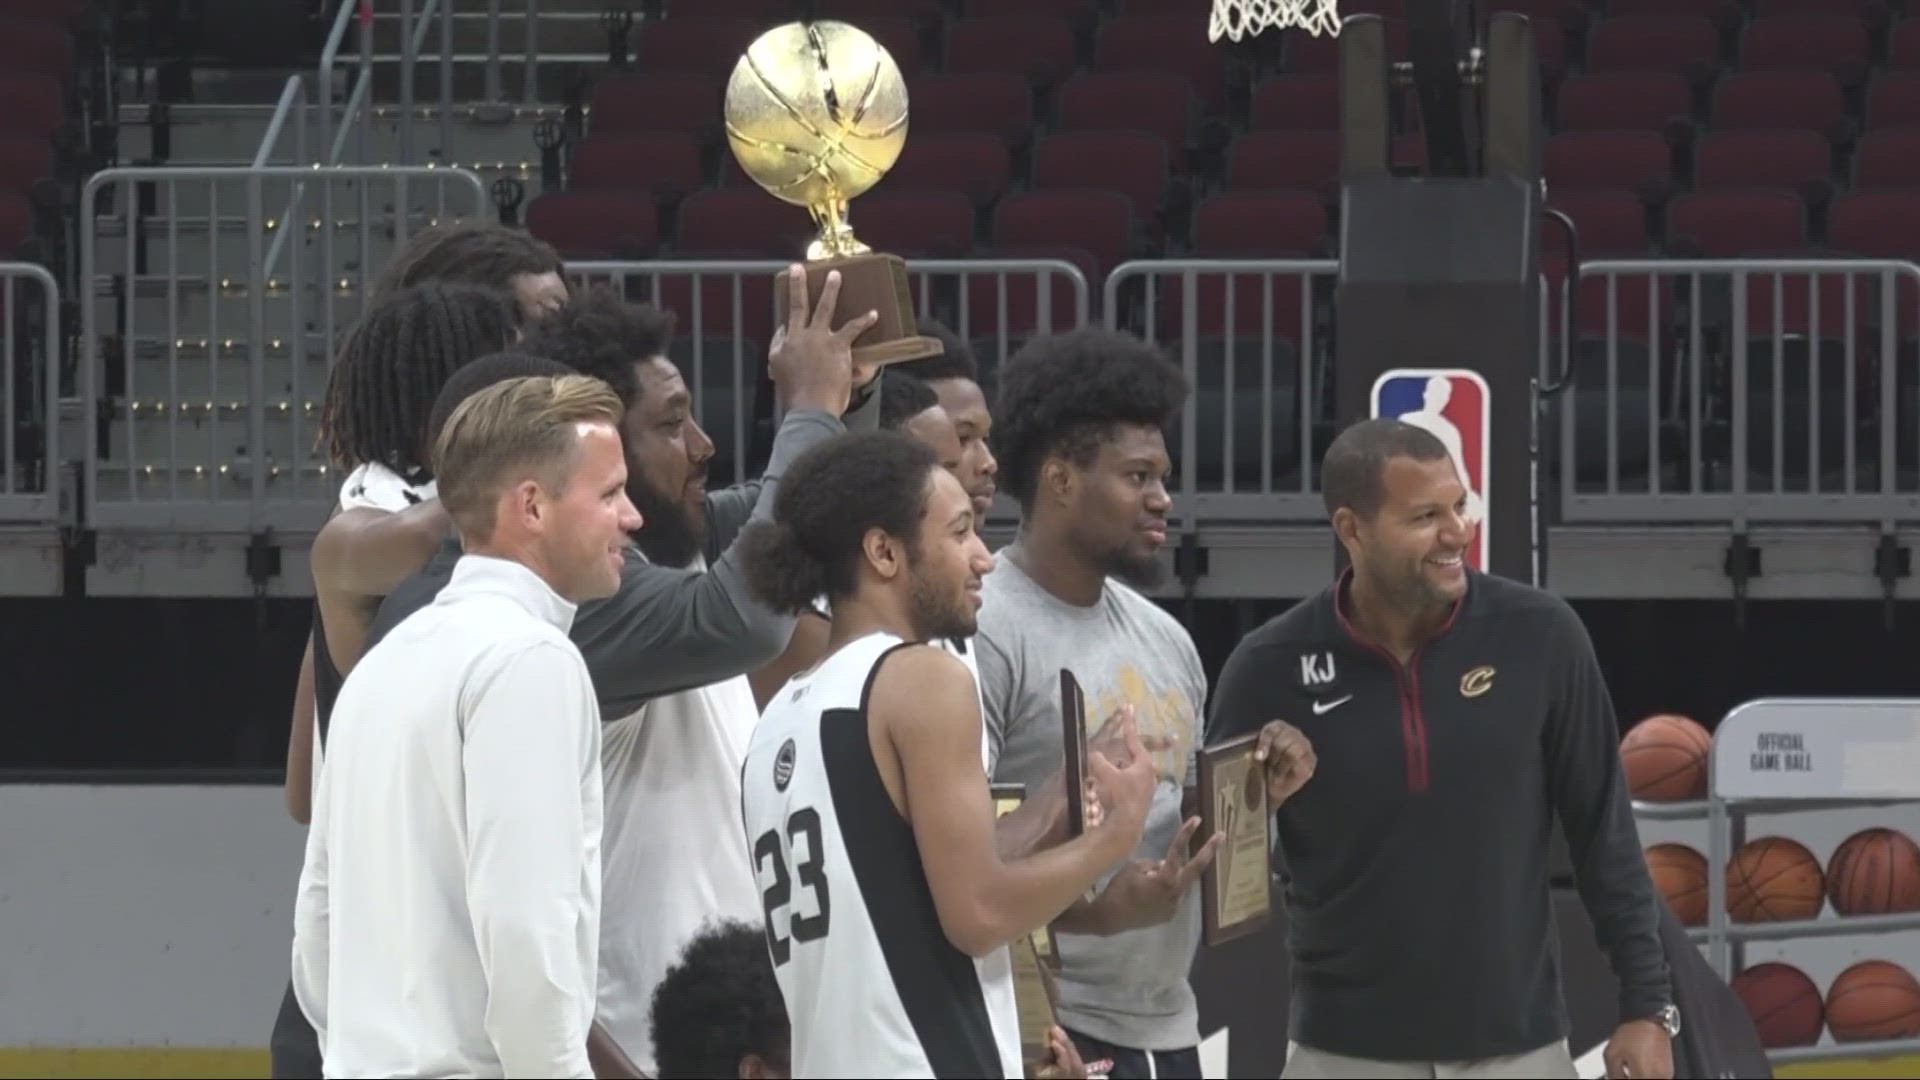 The City of Cleveland and the Cavaliers' program, 'Hoops After Dark,' has brought hundreds of young men together in an efforts to prevent violence in the city.